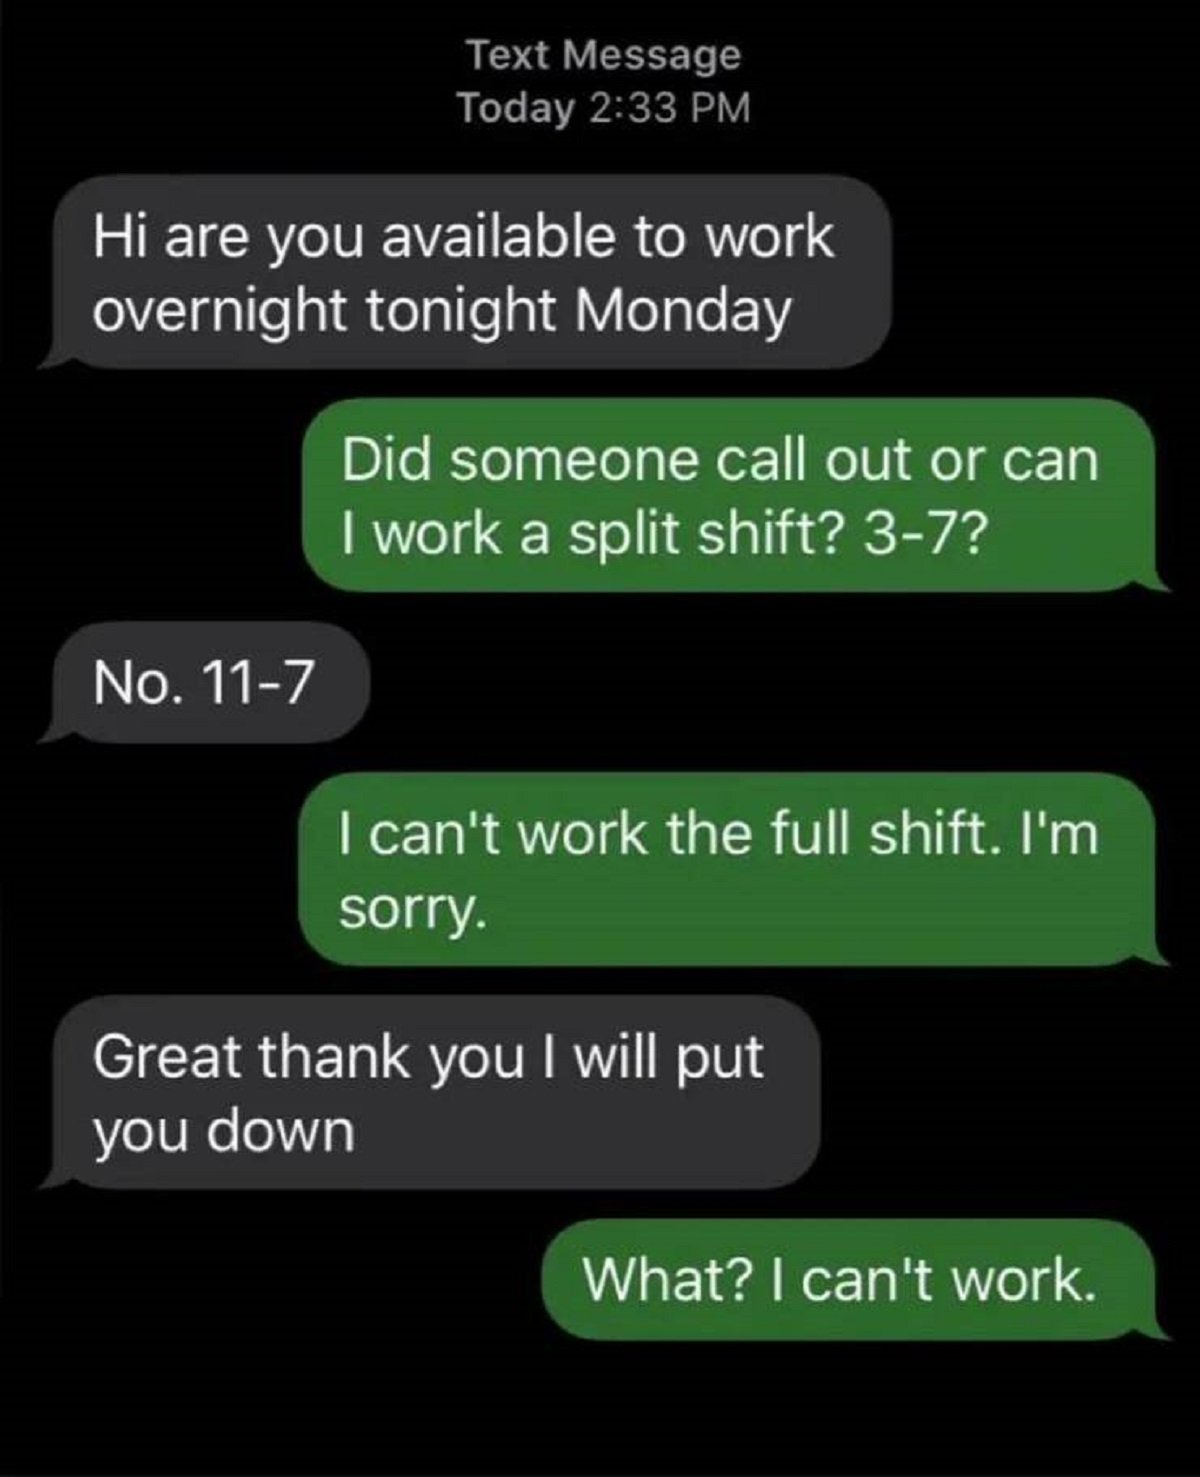 screenshot - Text Message Today Hi are you available to work overnight tonight Monday No. 117 Did someone call out or can I work a split shift? 37? I can't work the full shift. I'm sorry. Great thank you I will put you down What? I can't work.